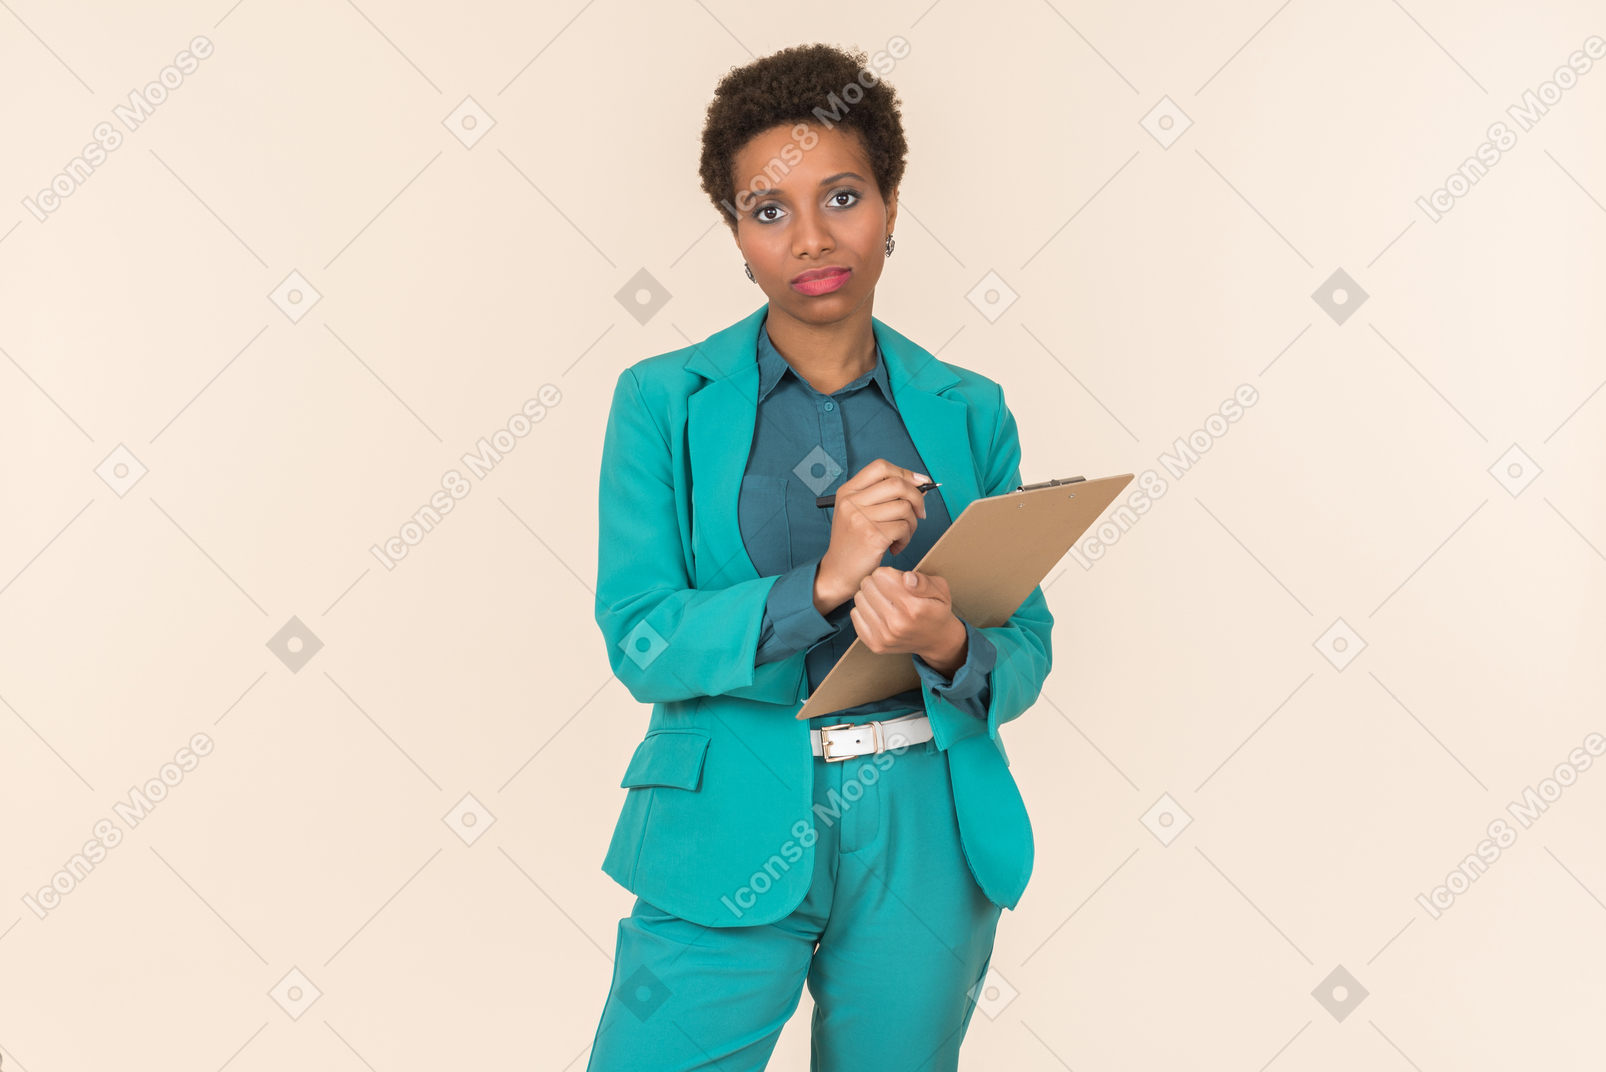 Serious looking female office worker holding folder